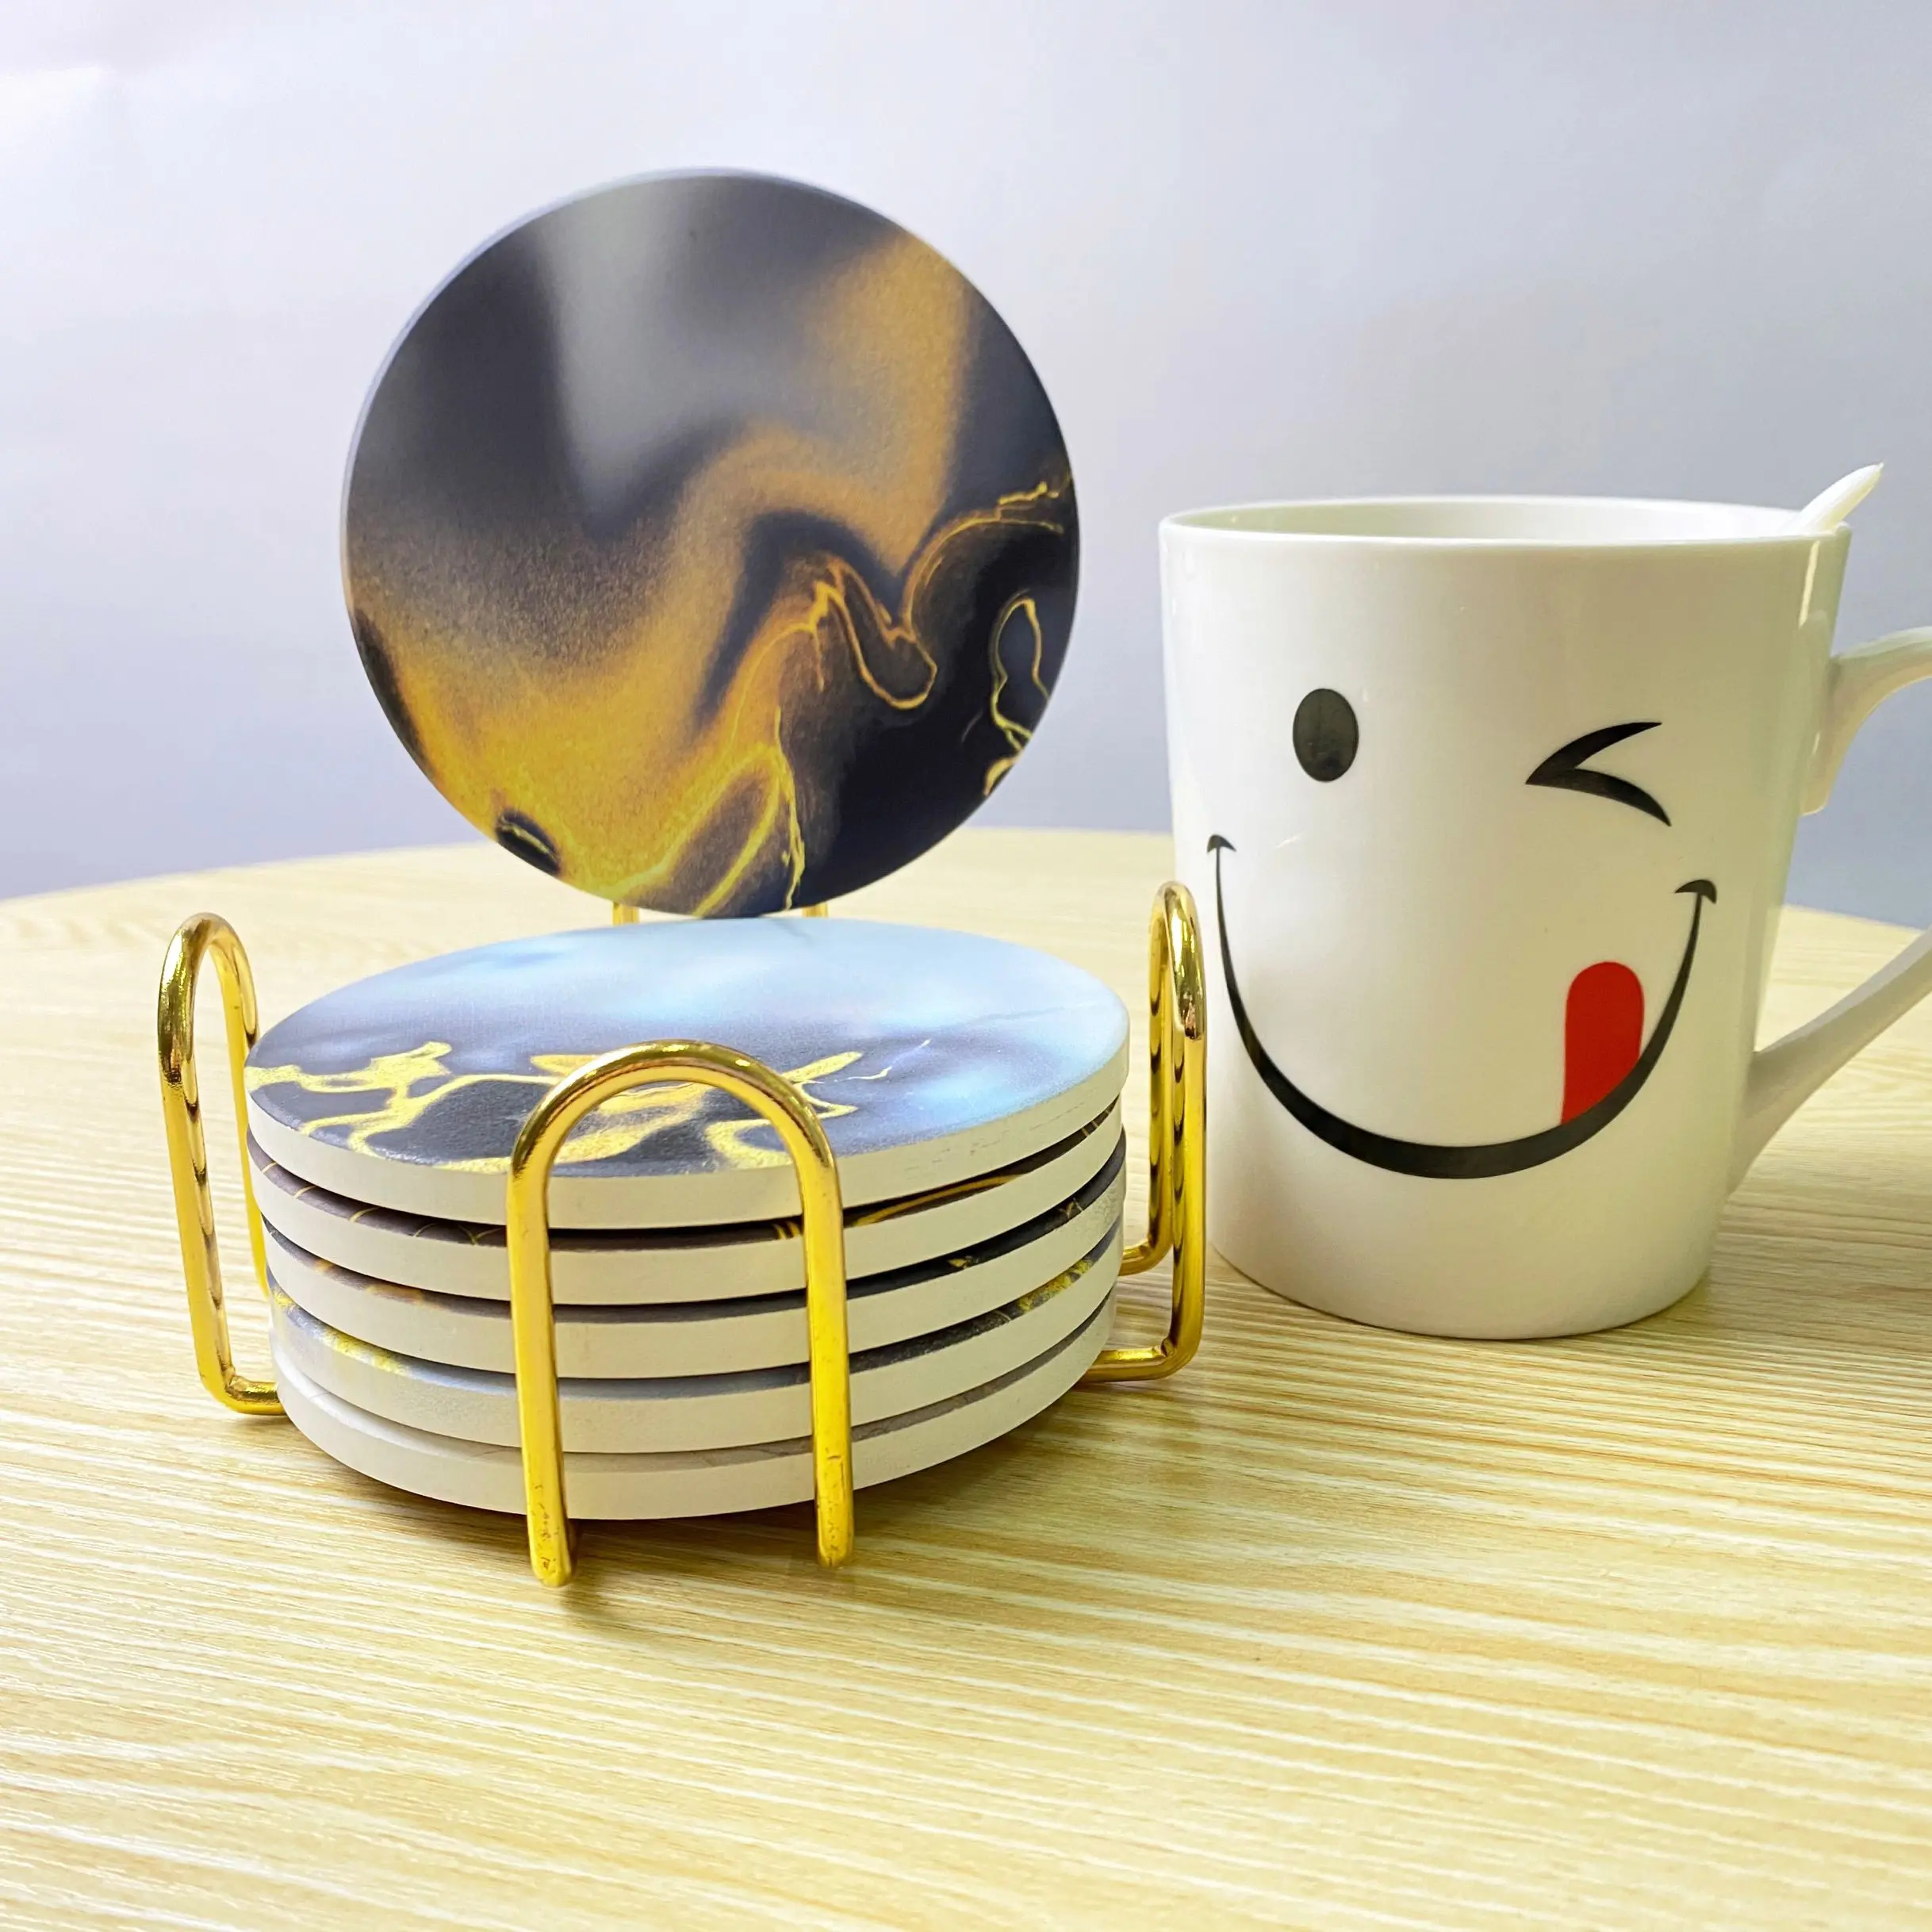 XS ltd candle holder Sand Stone Coaster White Green Drinking Cup Tea Wood Marble Coaster Gifts